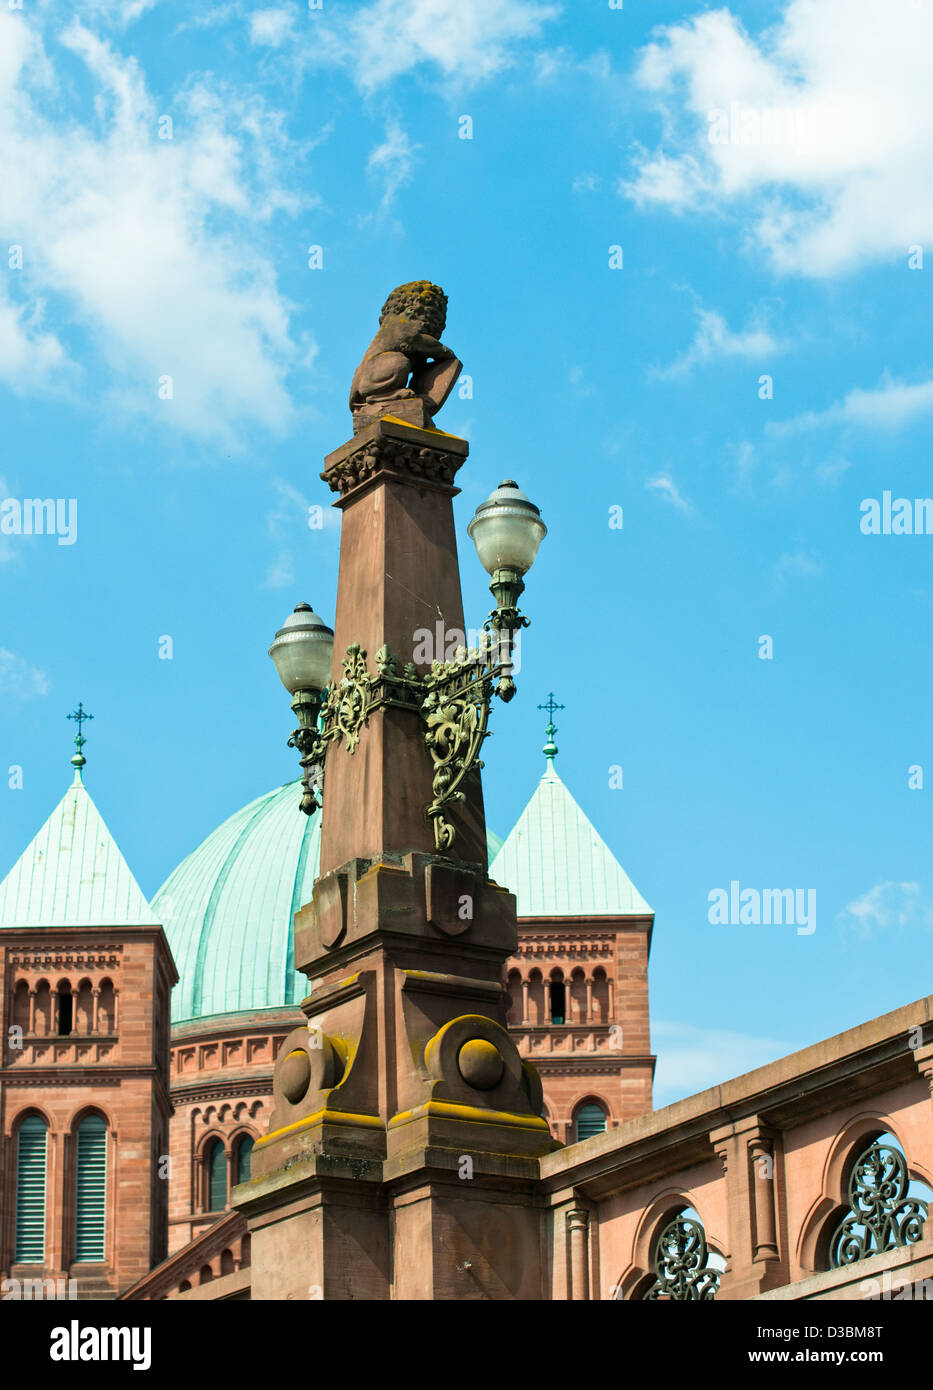 Strasbourg - France, Church, Alsace, Architecture, Old, Sandstone, Sky, Cathedral, Electric Light, Concepts And Ideas, Stock Photo